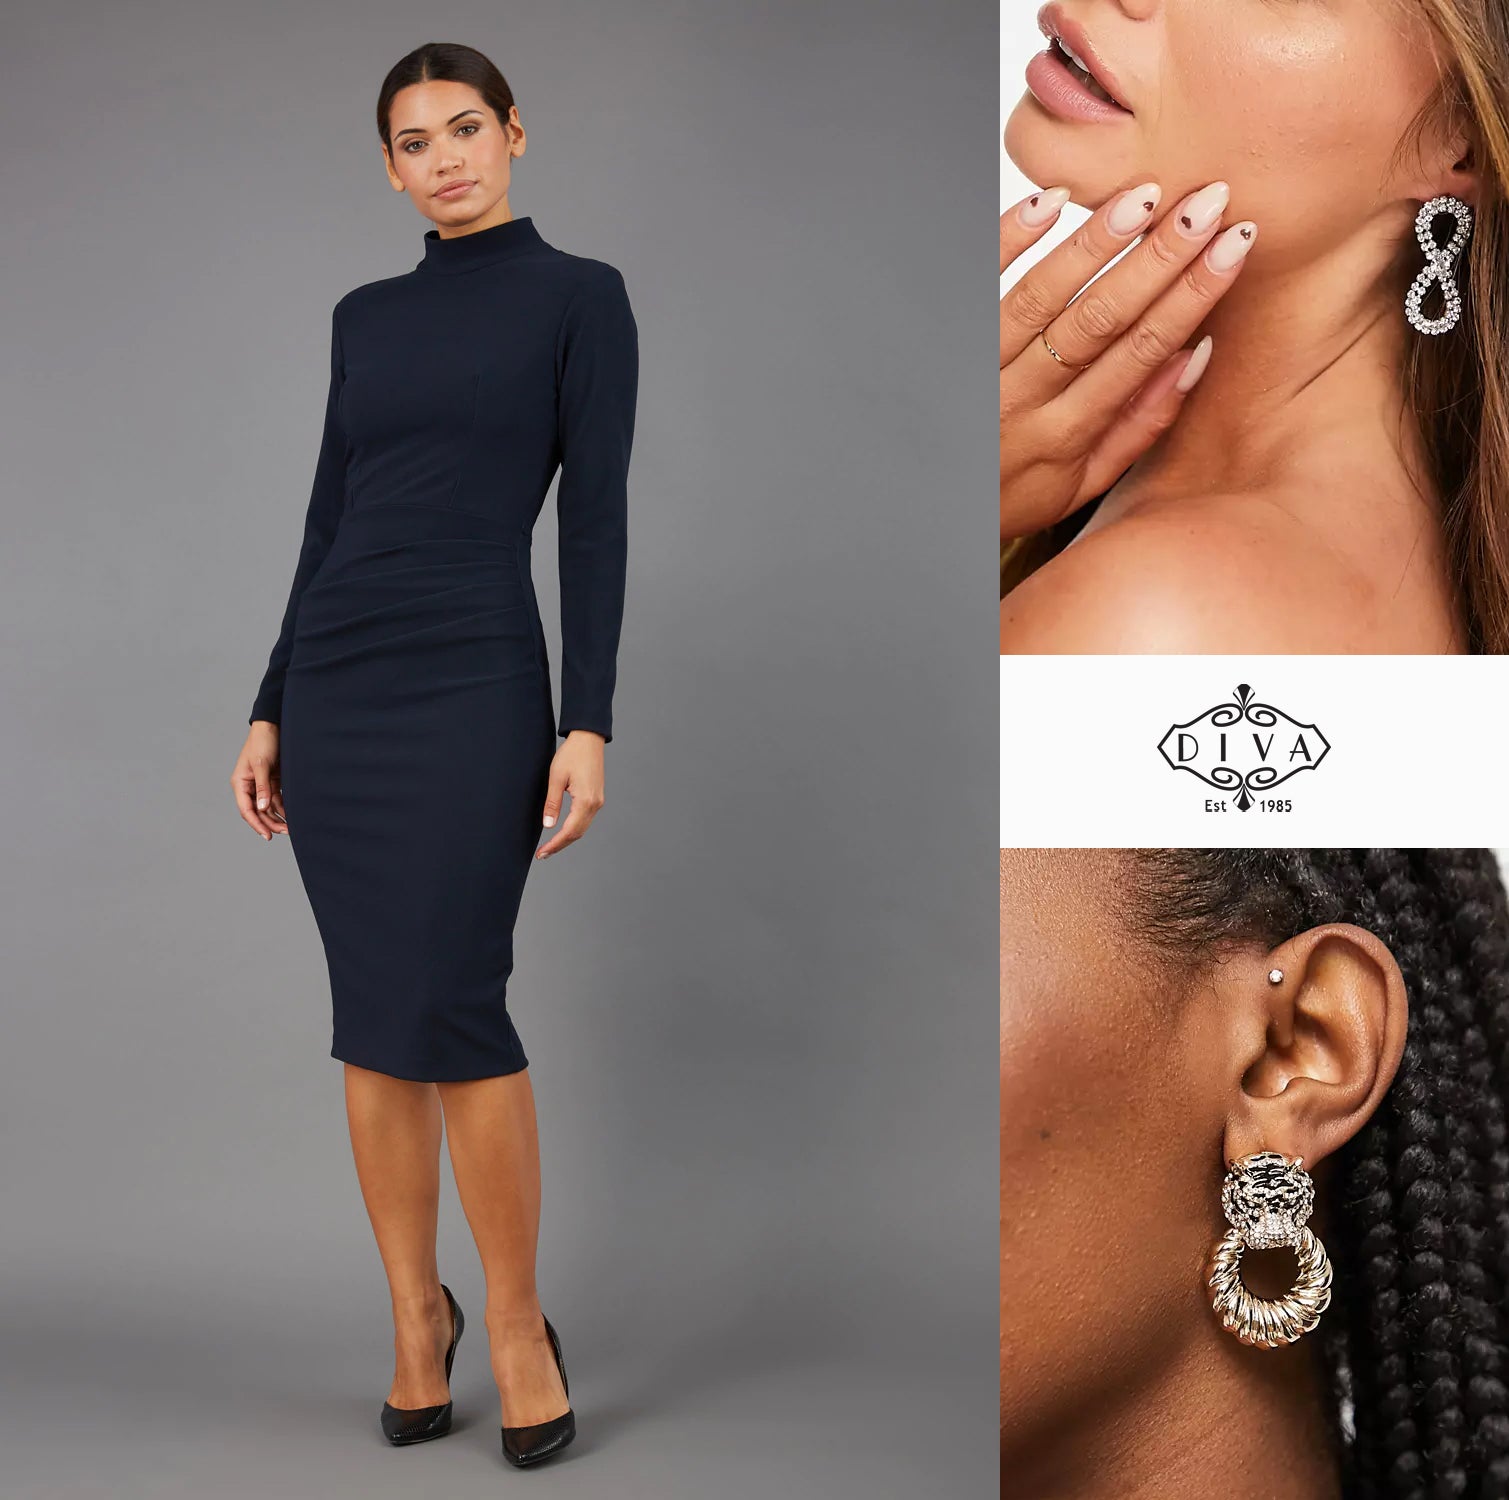 a model pictured wearing the high neck Sasha dress with two earring accessory images to the right.